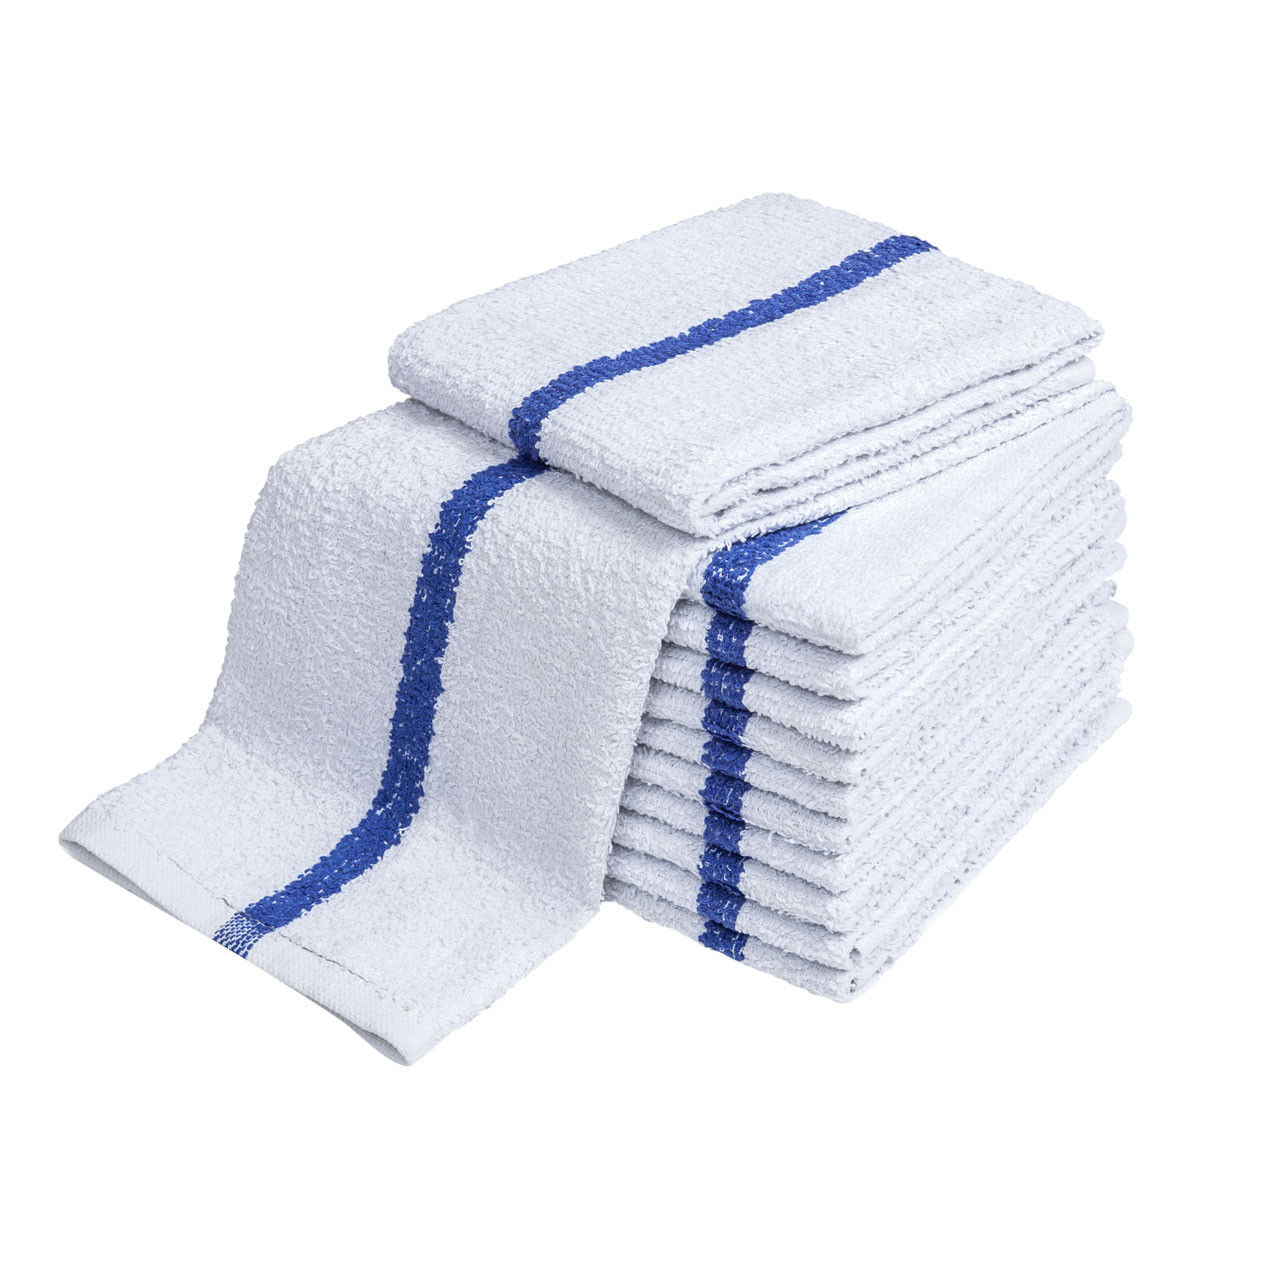 In what weights are the ADI Bar Towels, Full Terry, Center Stripe bar towels available?